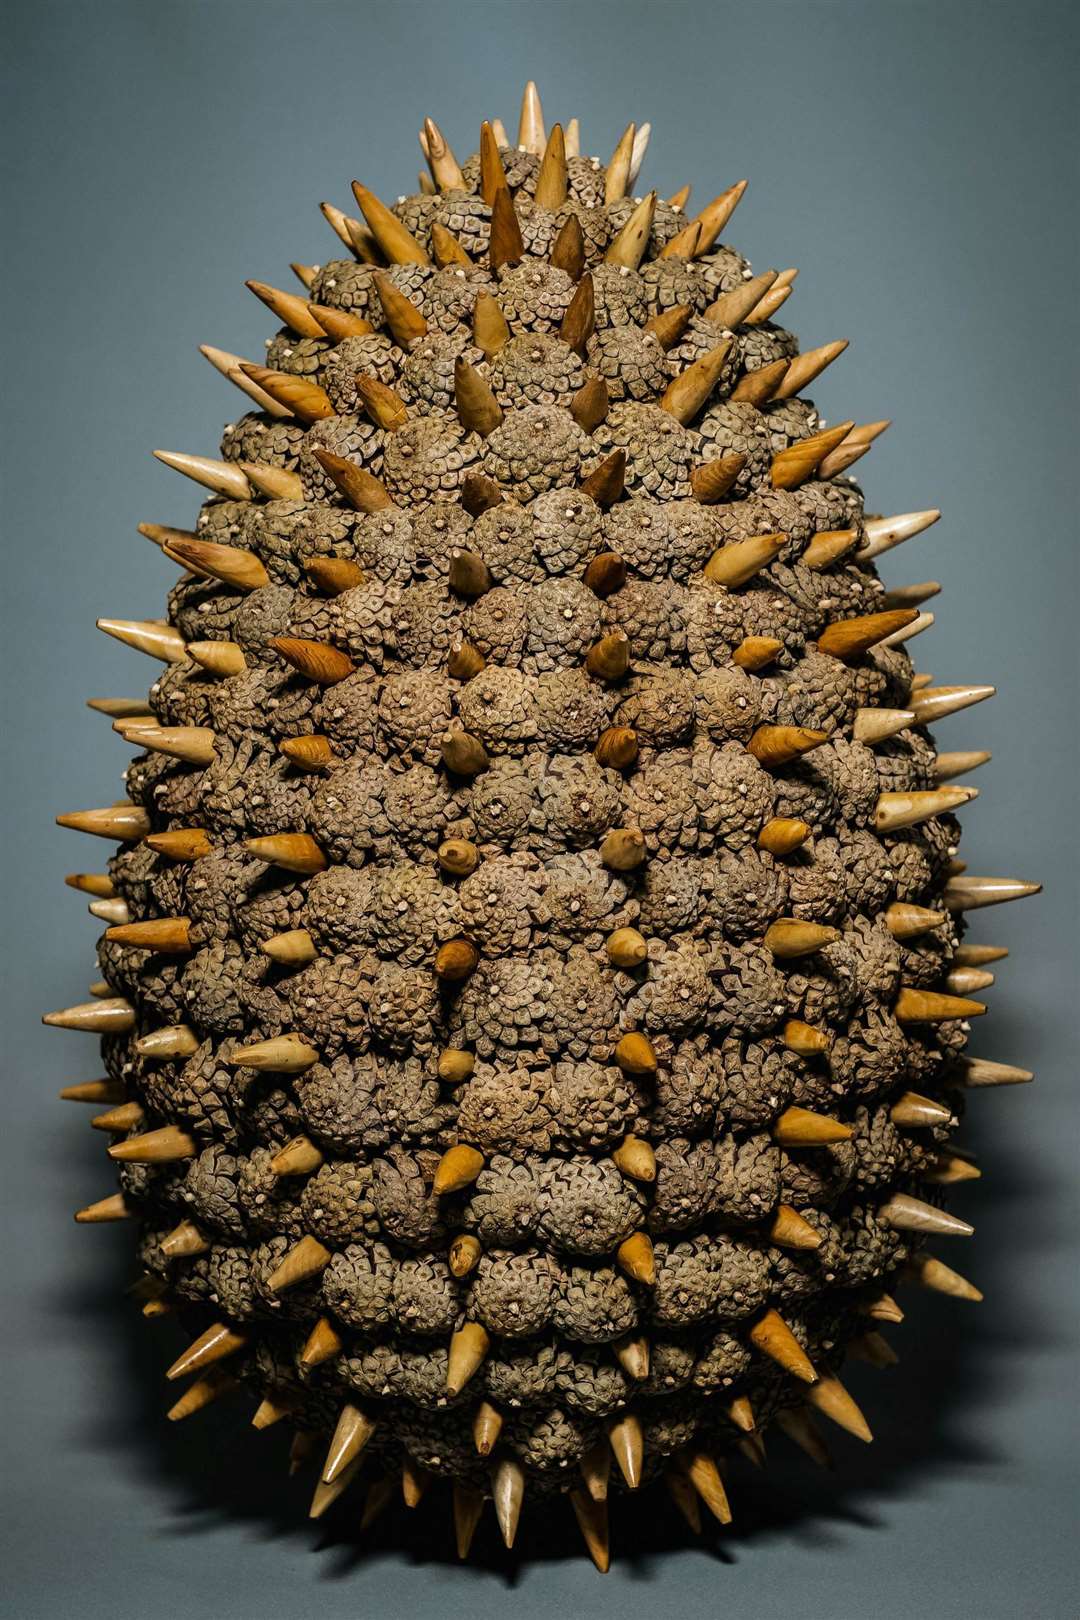 Egg Sculpture made from pine cones.